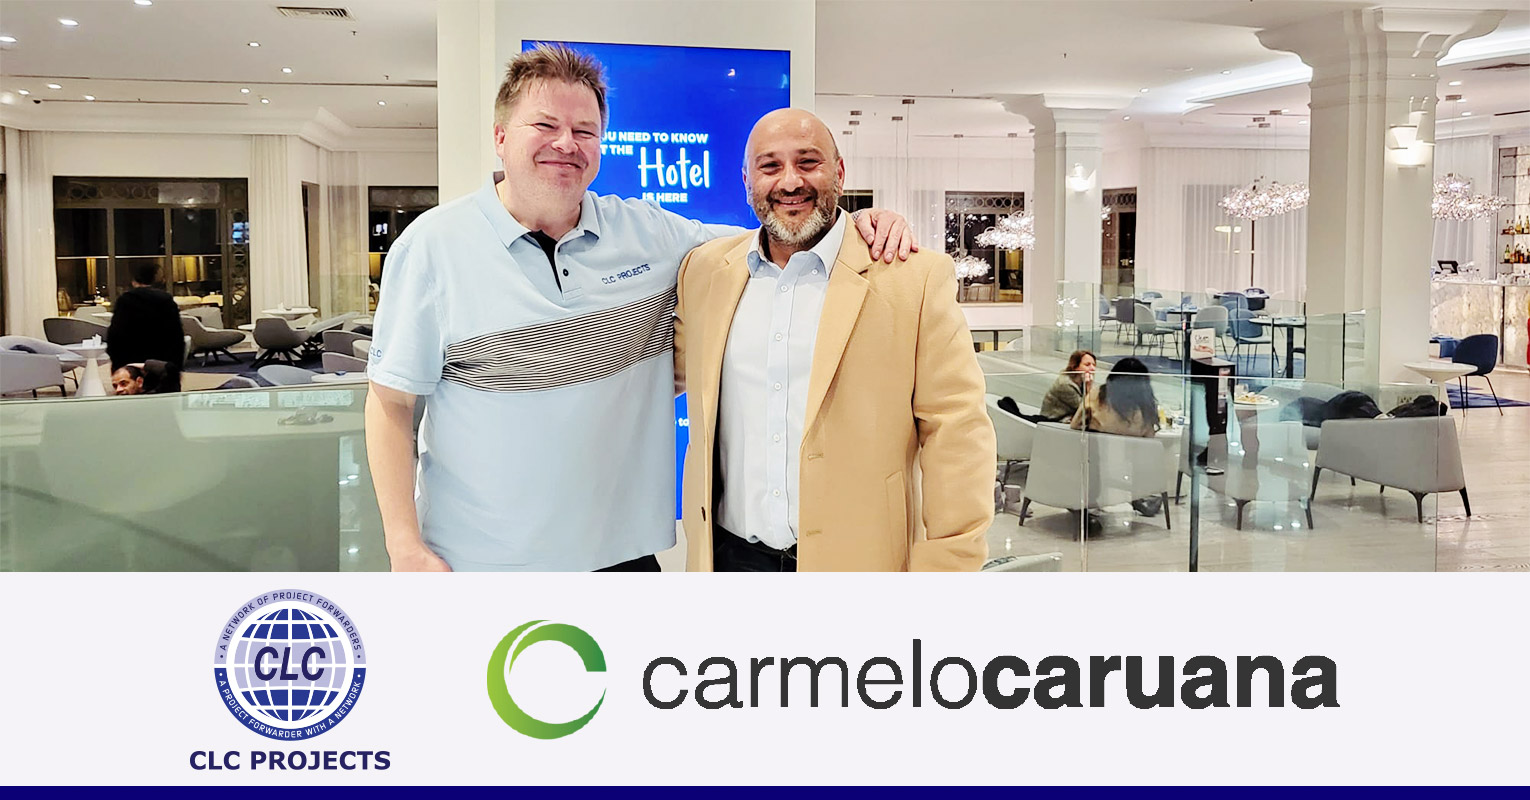 CLC Projects met with Darin Zahra of Carmelo Caruana Malta - Service Provider to CLC Projects